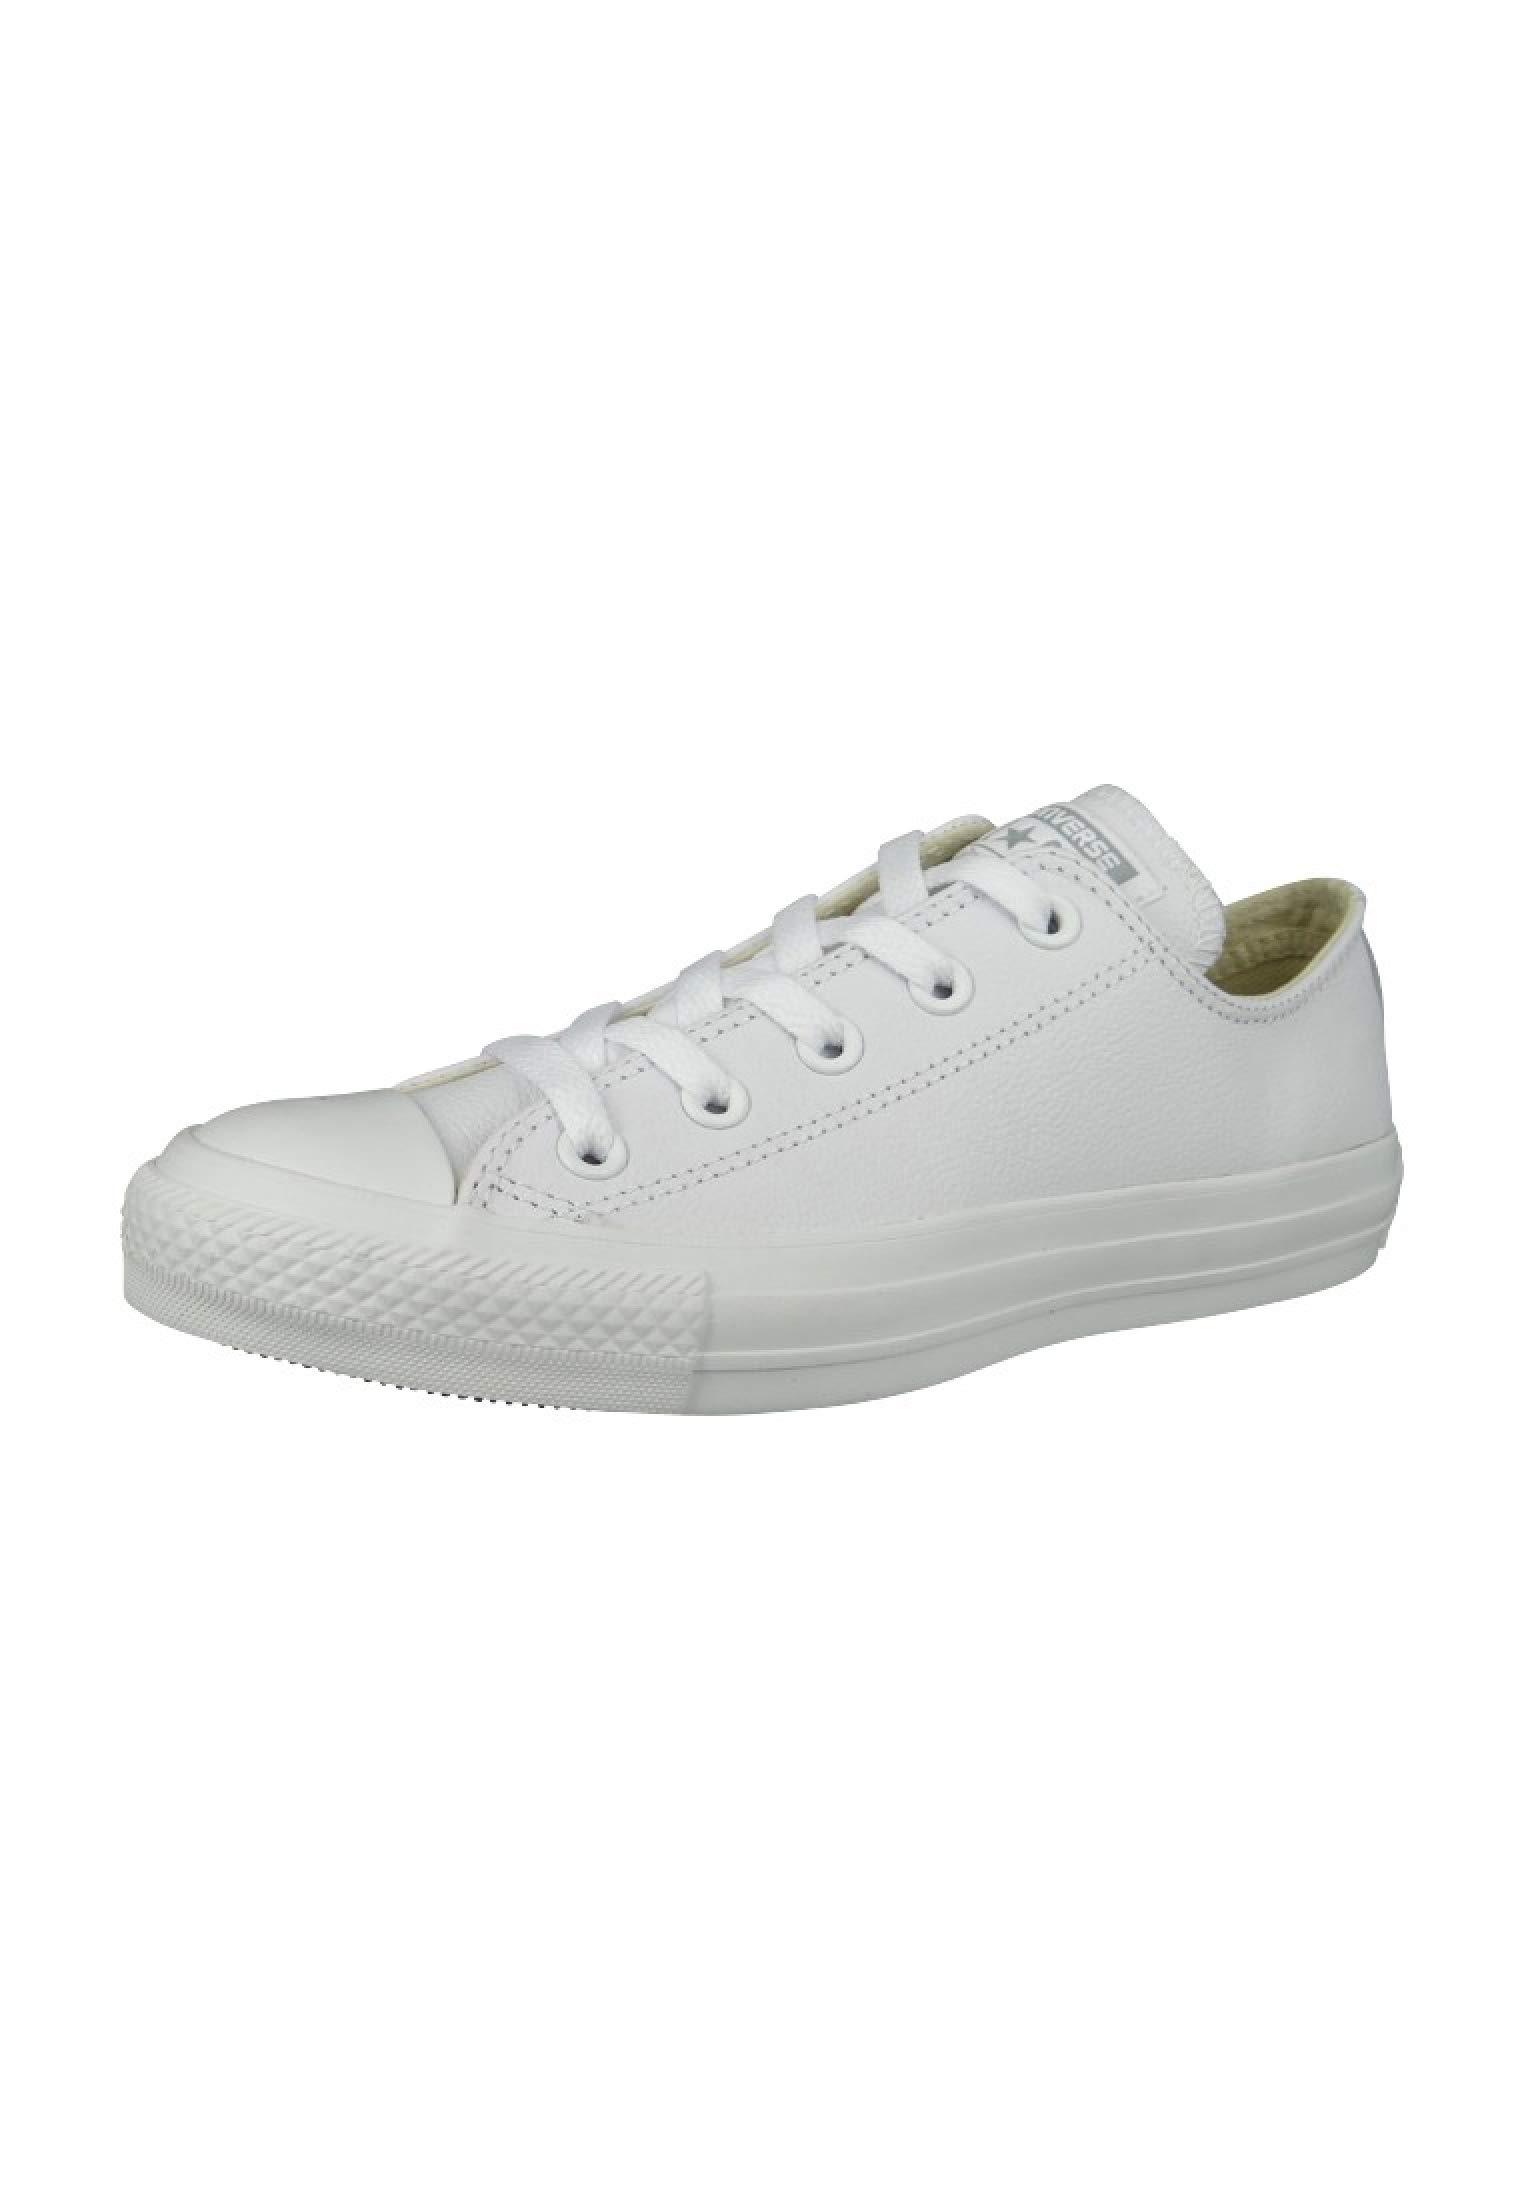 Converse All Star Ox Leather White Mono Trainers-uk 10.5 | Lyst